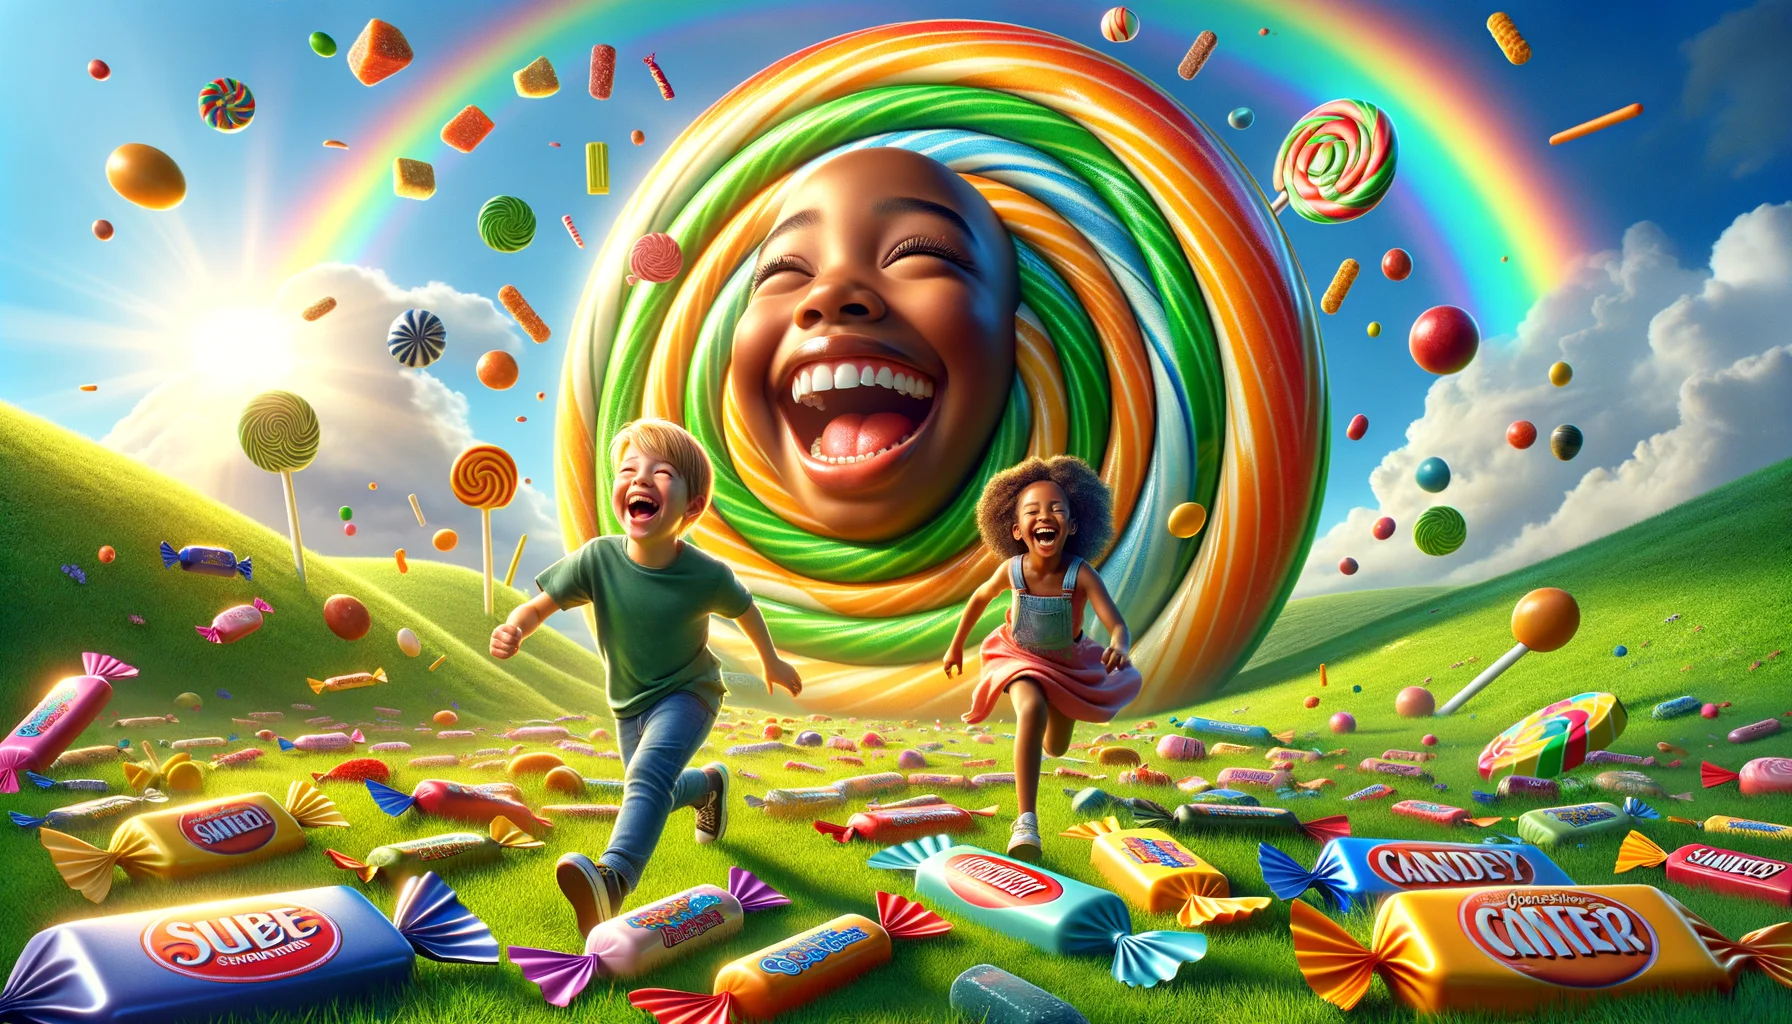 Create a vibrant, highly detailed and amusing image that depicts a perfect scenario for showcasing 'Candy with Natural Sweeteners'. Visualise a setting where the sun is shining, a beautiful rainbow arcs across a clear blue sky and life-size versions of various candy pieces with natural sweeteners are scattered across a lush, green meadow. In the foreground, two radiant children of Hispanic and Black descent, a boy and a girl respectively, are joyfully running towards a gigantic piece of candy, their laughter echoing across the field. Their faces light up with anticipation, perfectly demonstrating the utter joy that such candies can bring.